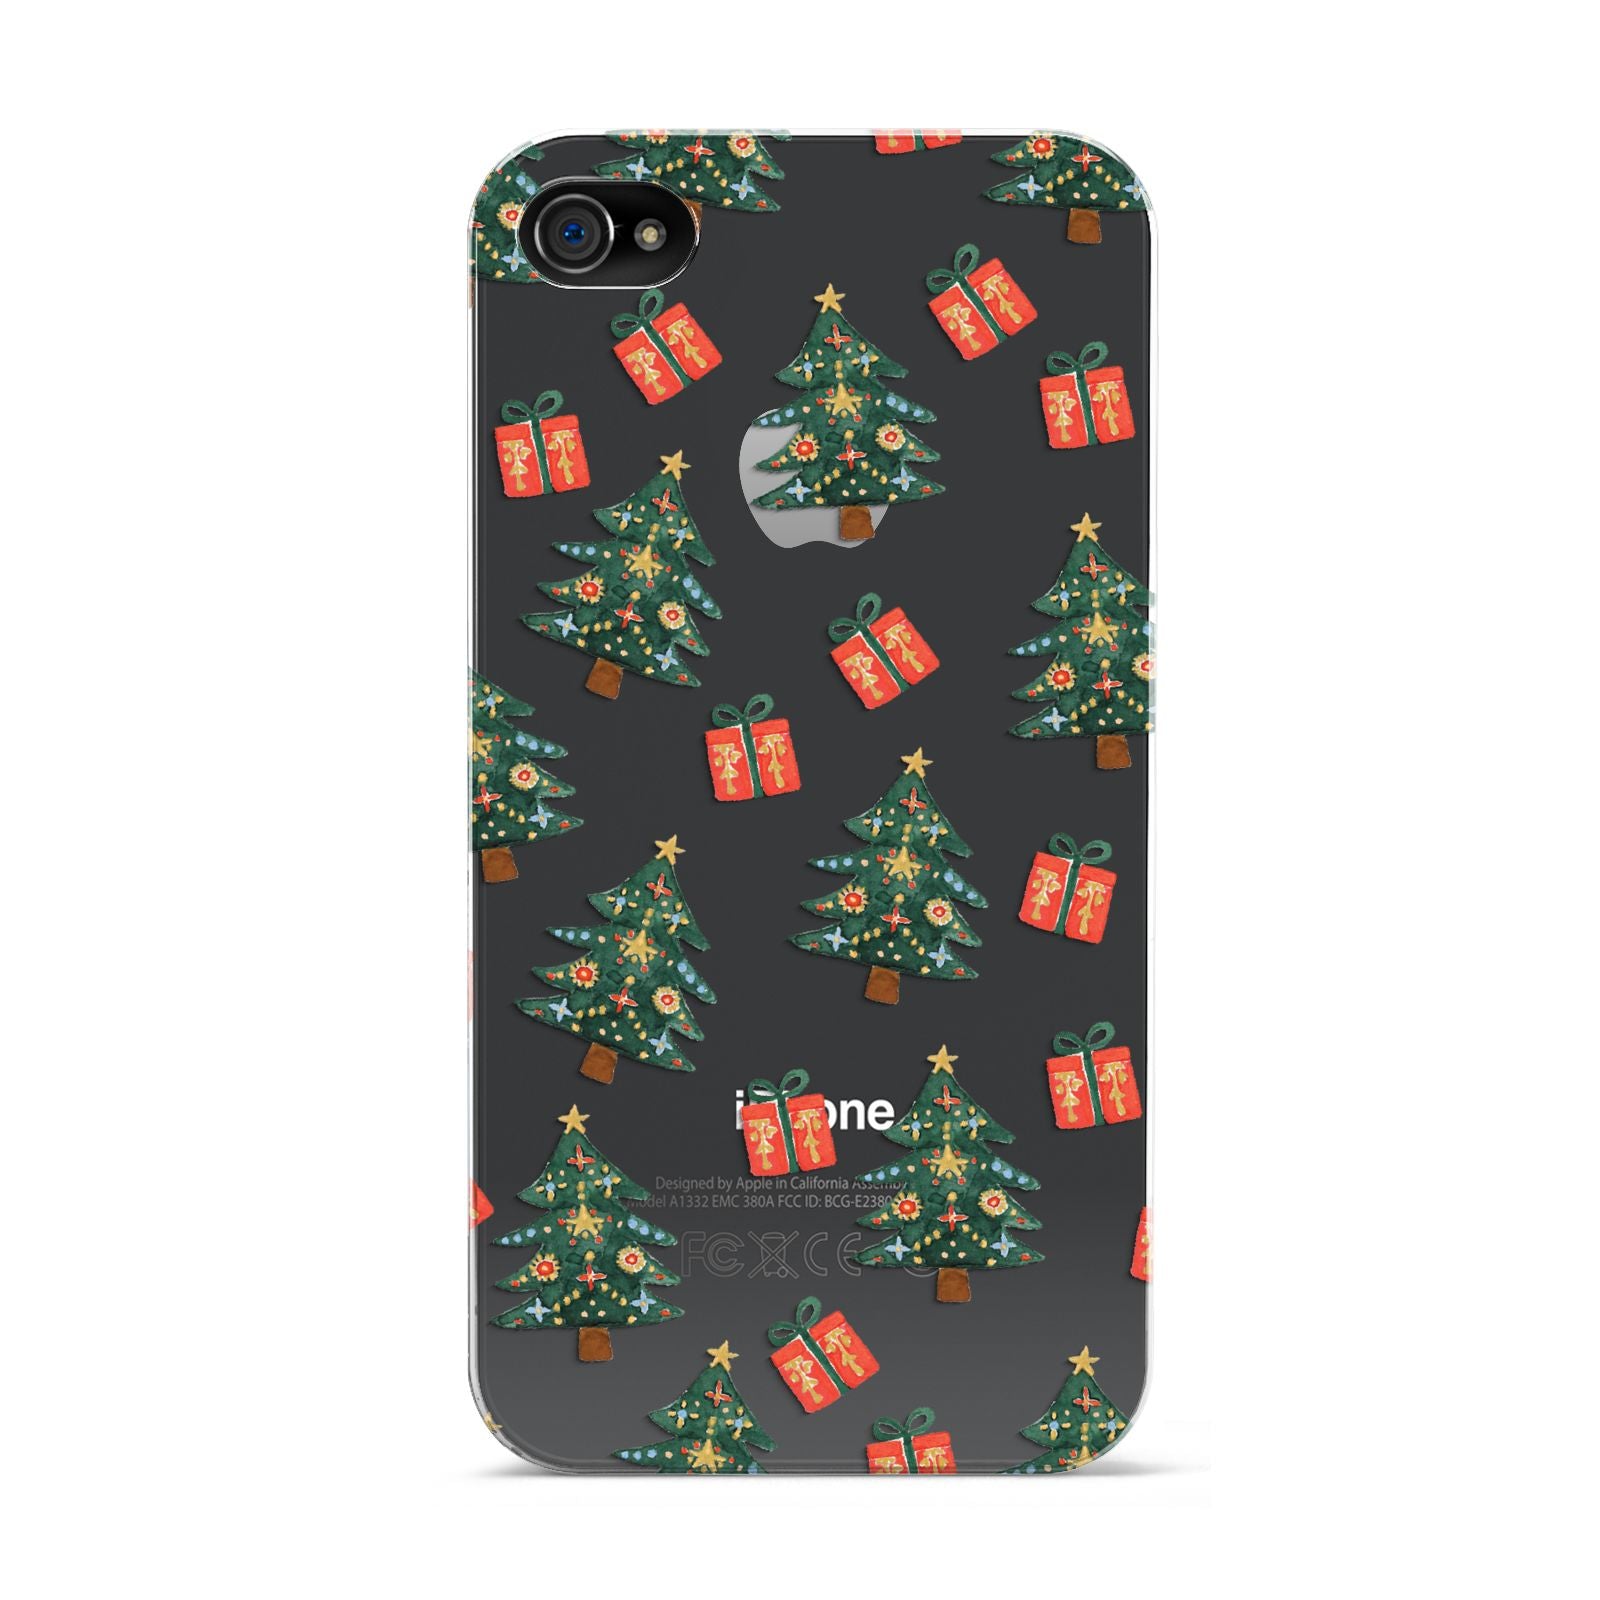 Christmas tree and presents Apple iPhone 4s Case